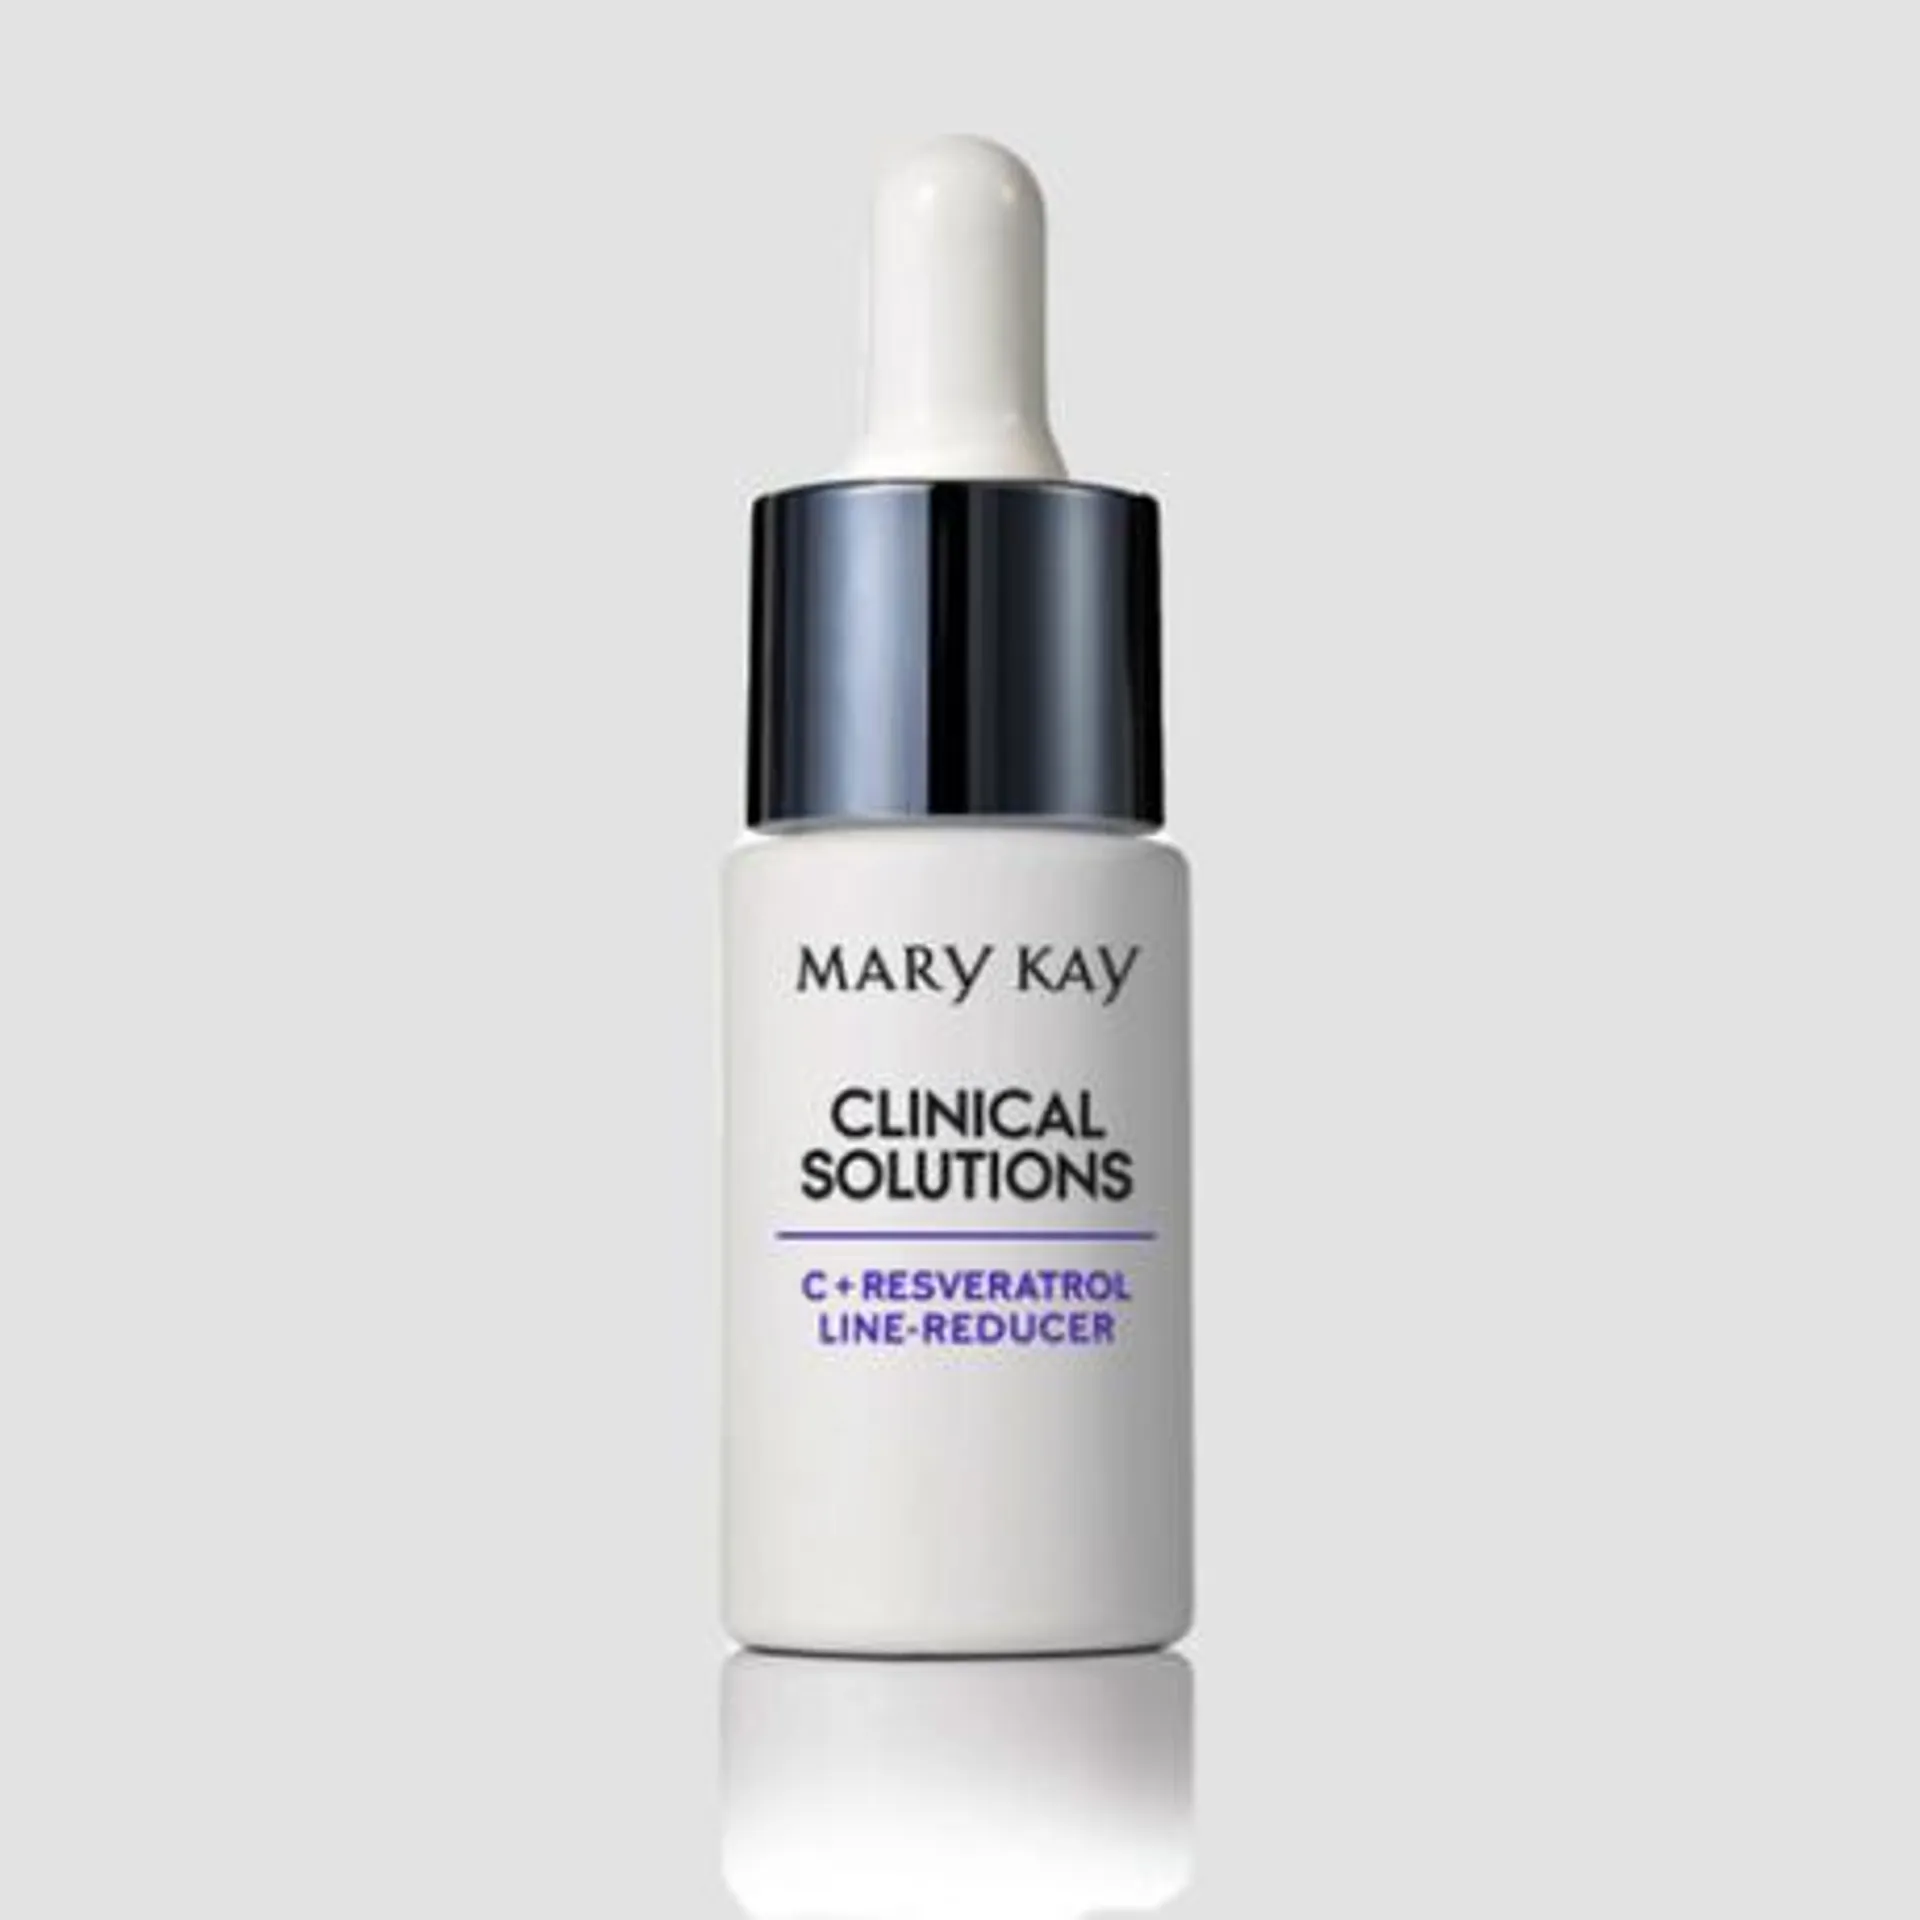 Mary Kay Clinical Solutions™ C + Resveratrol Line-Reducer